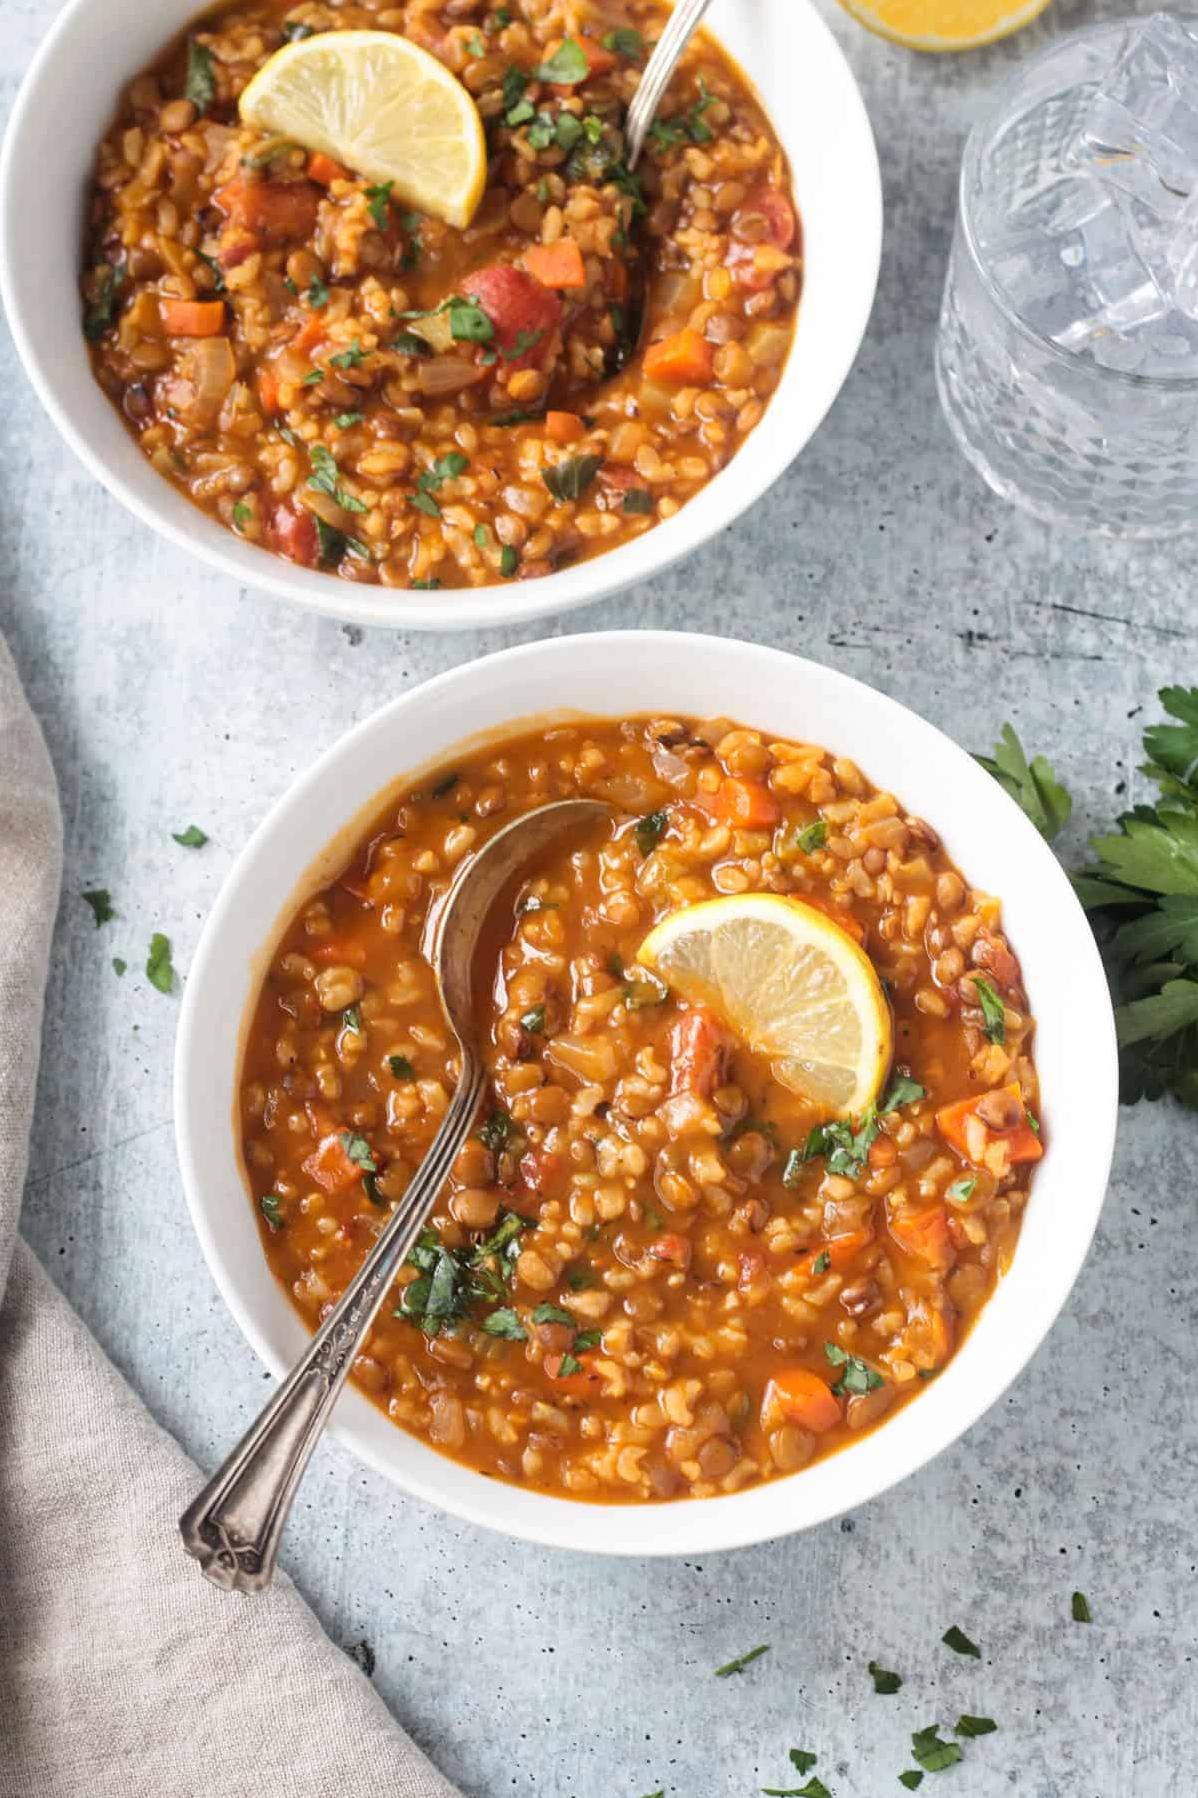  Red yeast rice adds a pop of color and flavor to this classic lentil soup